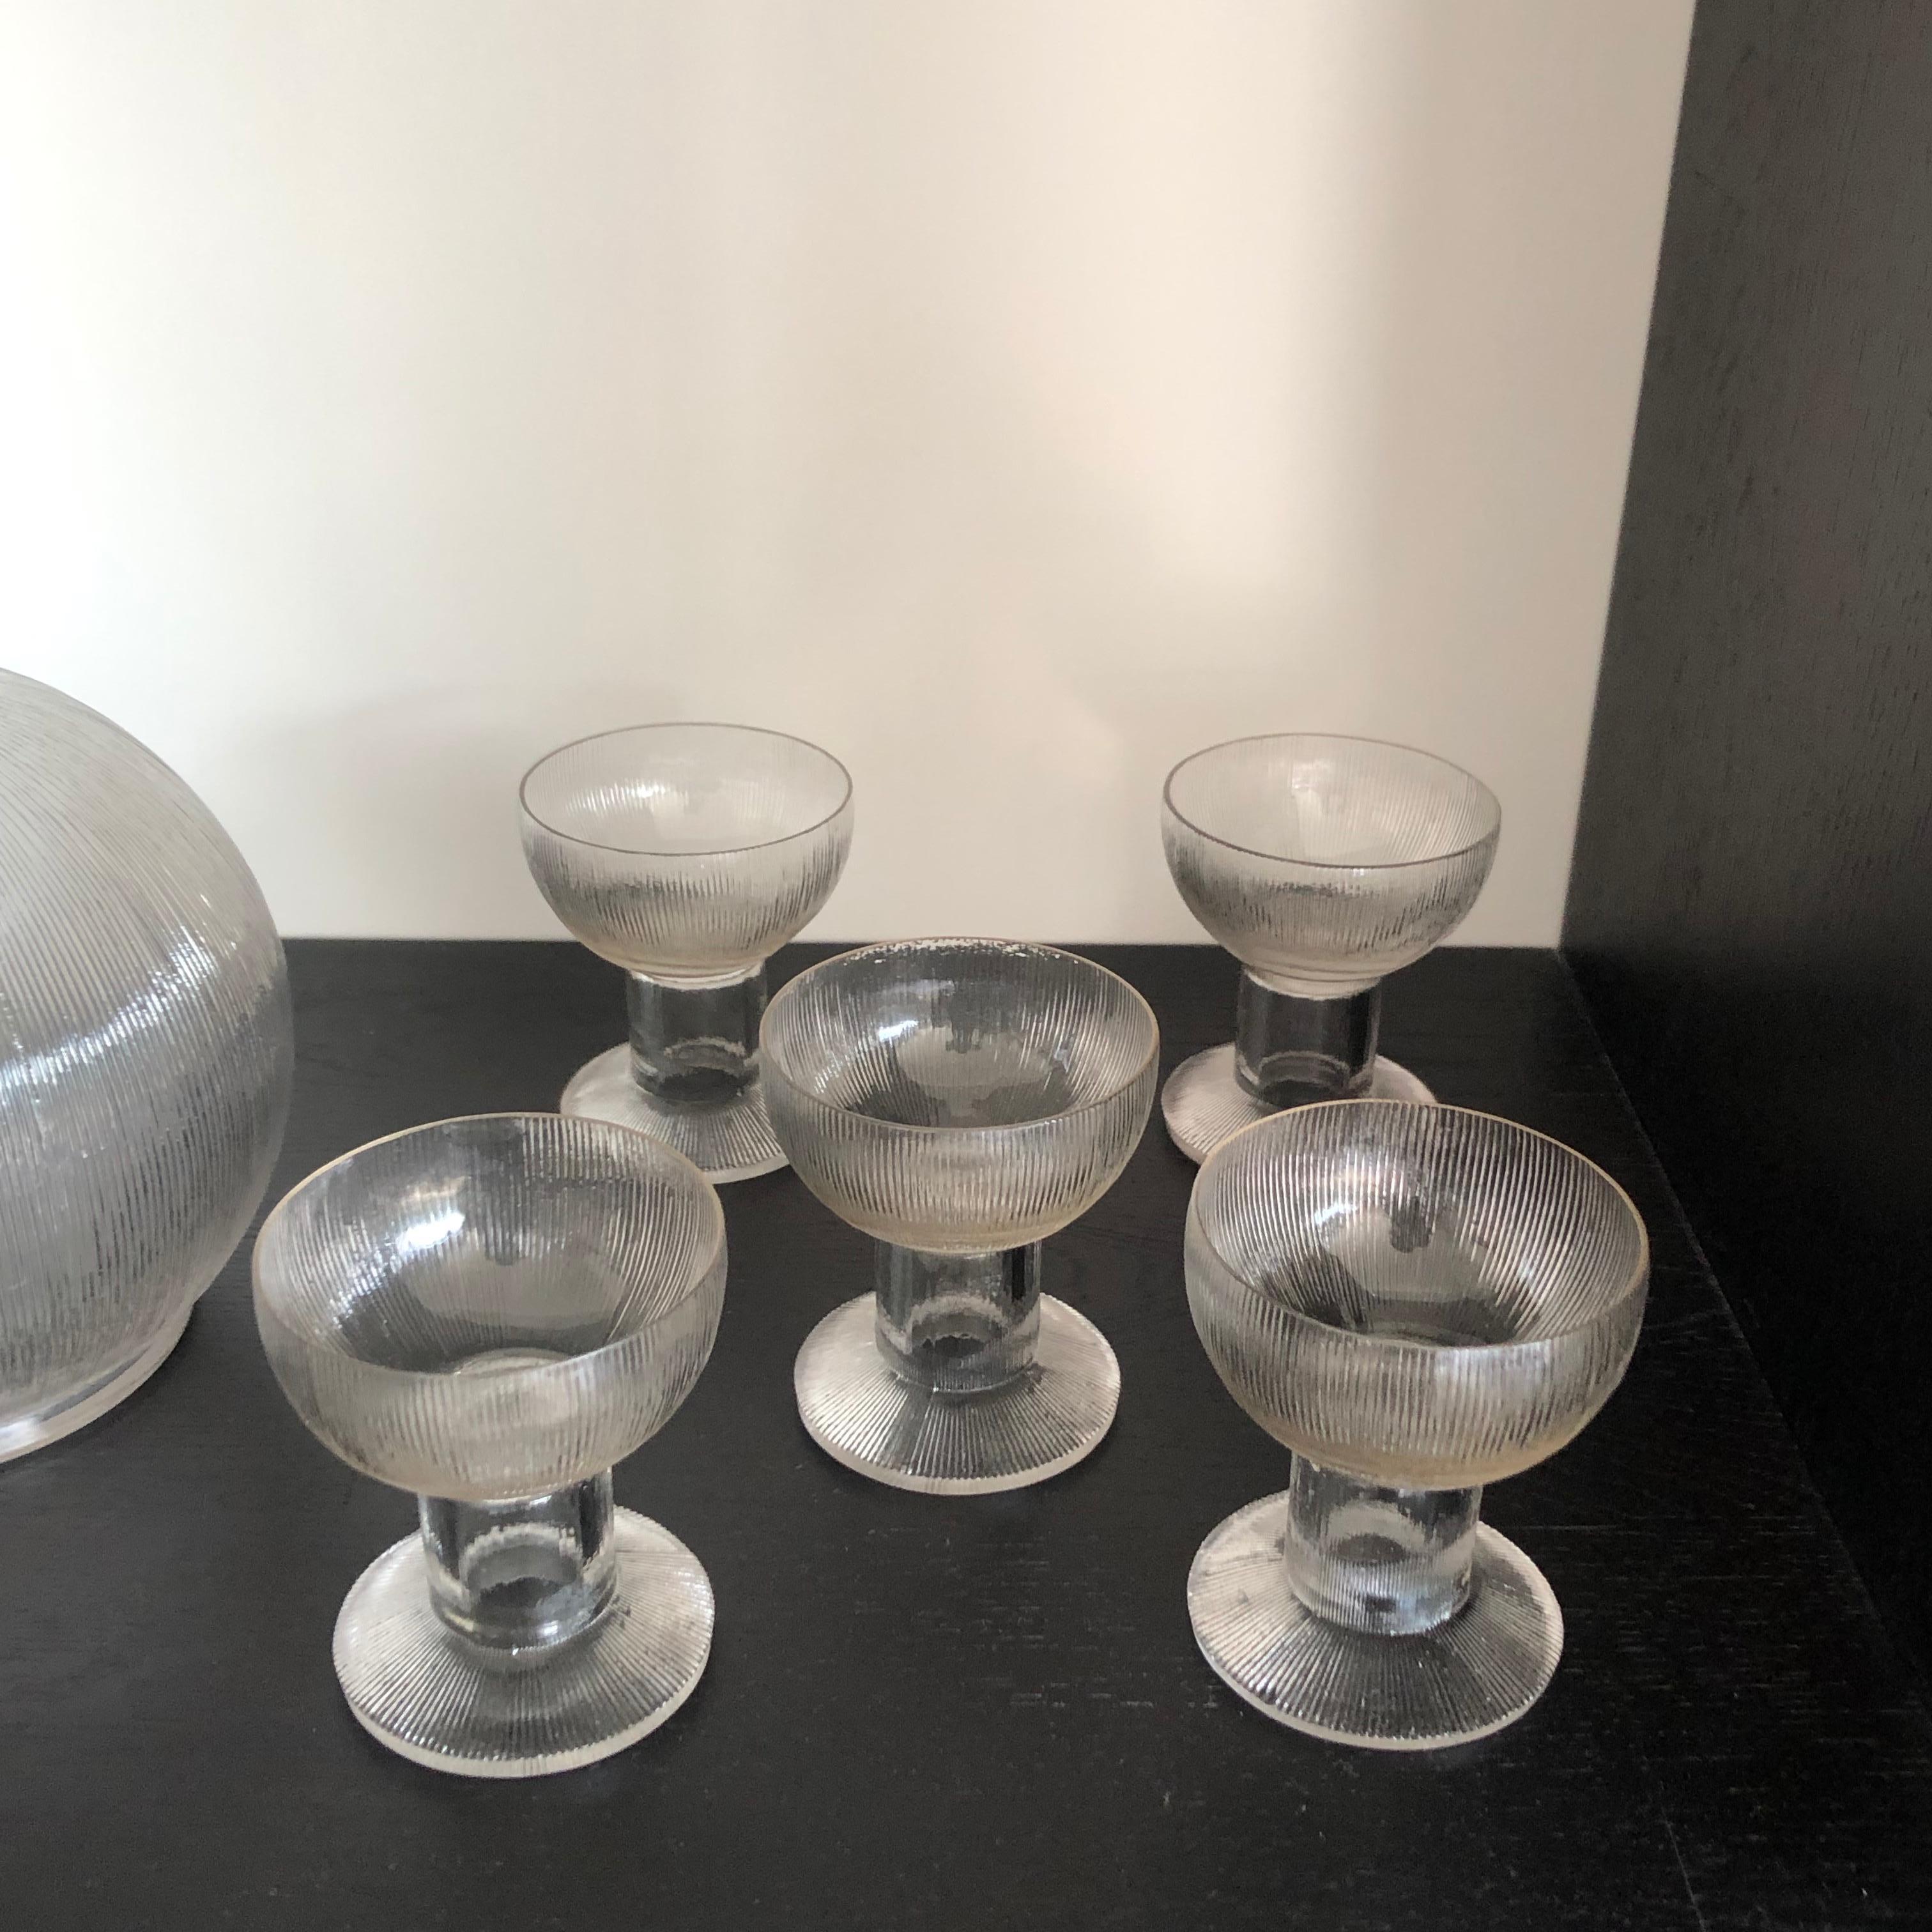 French 1926 Rene Lalique Wingen Set 11 Pieces Drinking Glasses Stems and Decanter